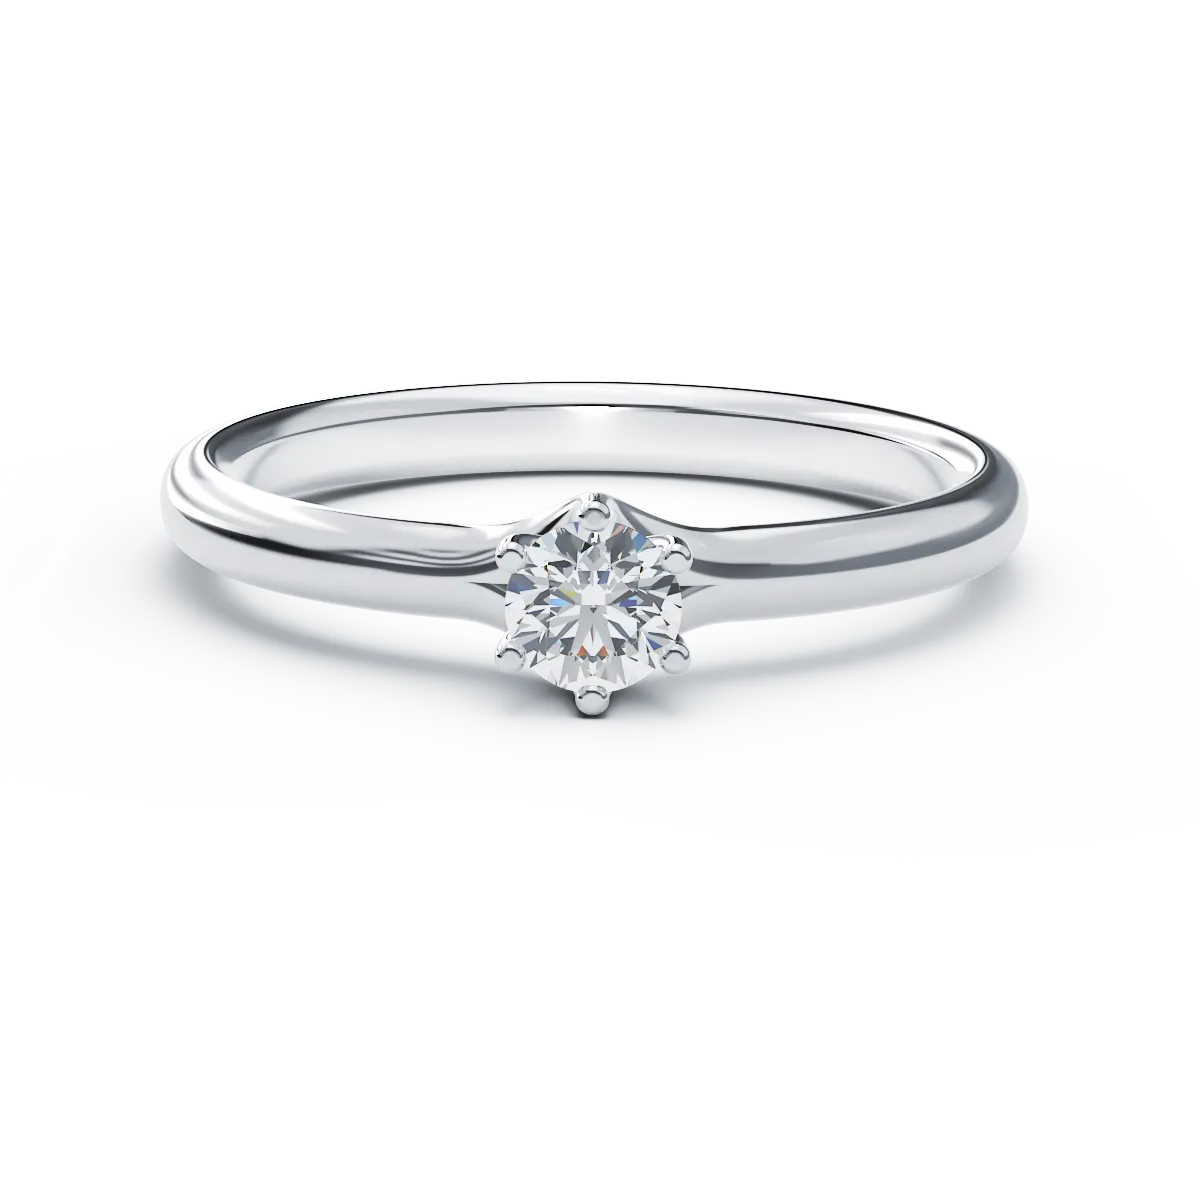 Platinum engagement ring with a 0.24ct solitaire diamond